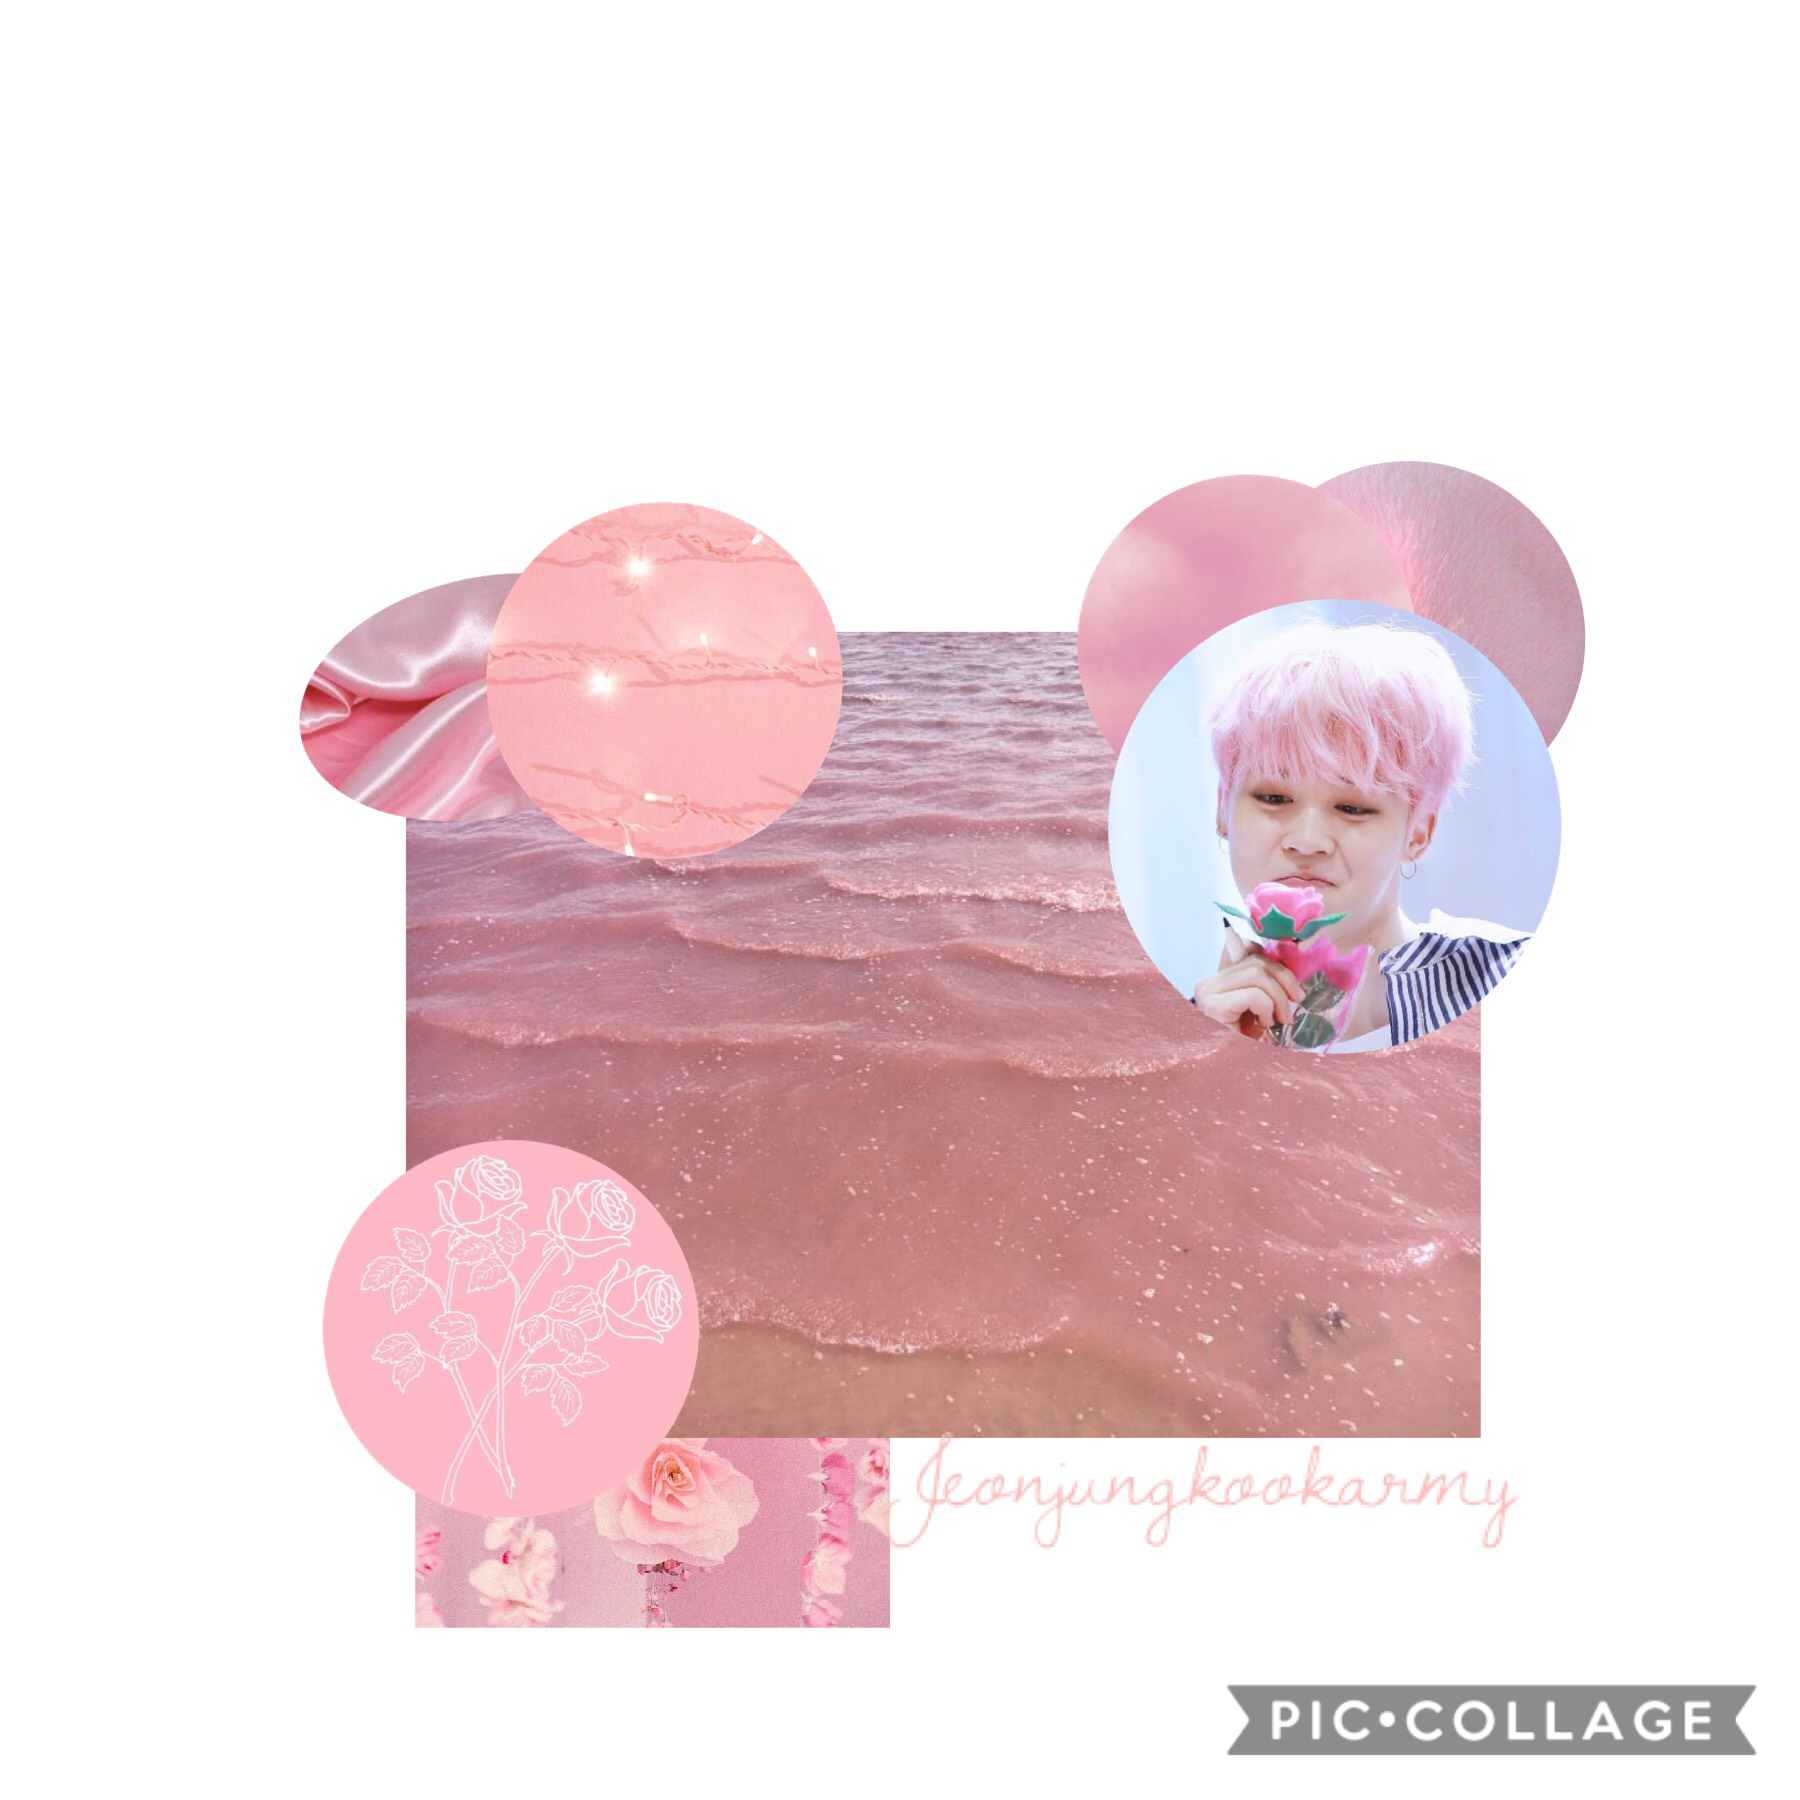 💗tap💗
Heyyyyy if this gets 16 likes I will officially do a face reaveal 